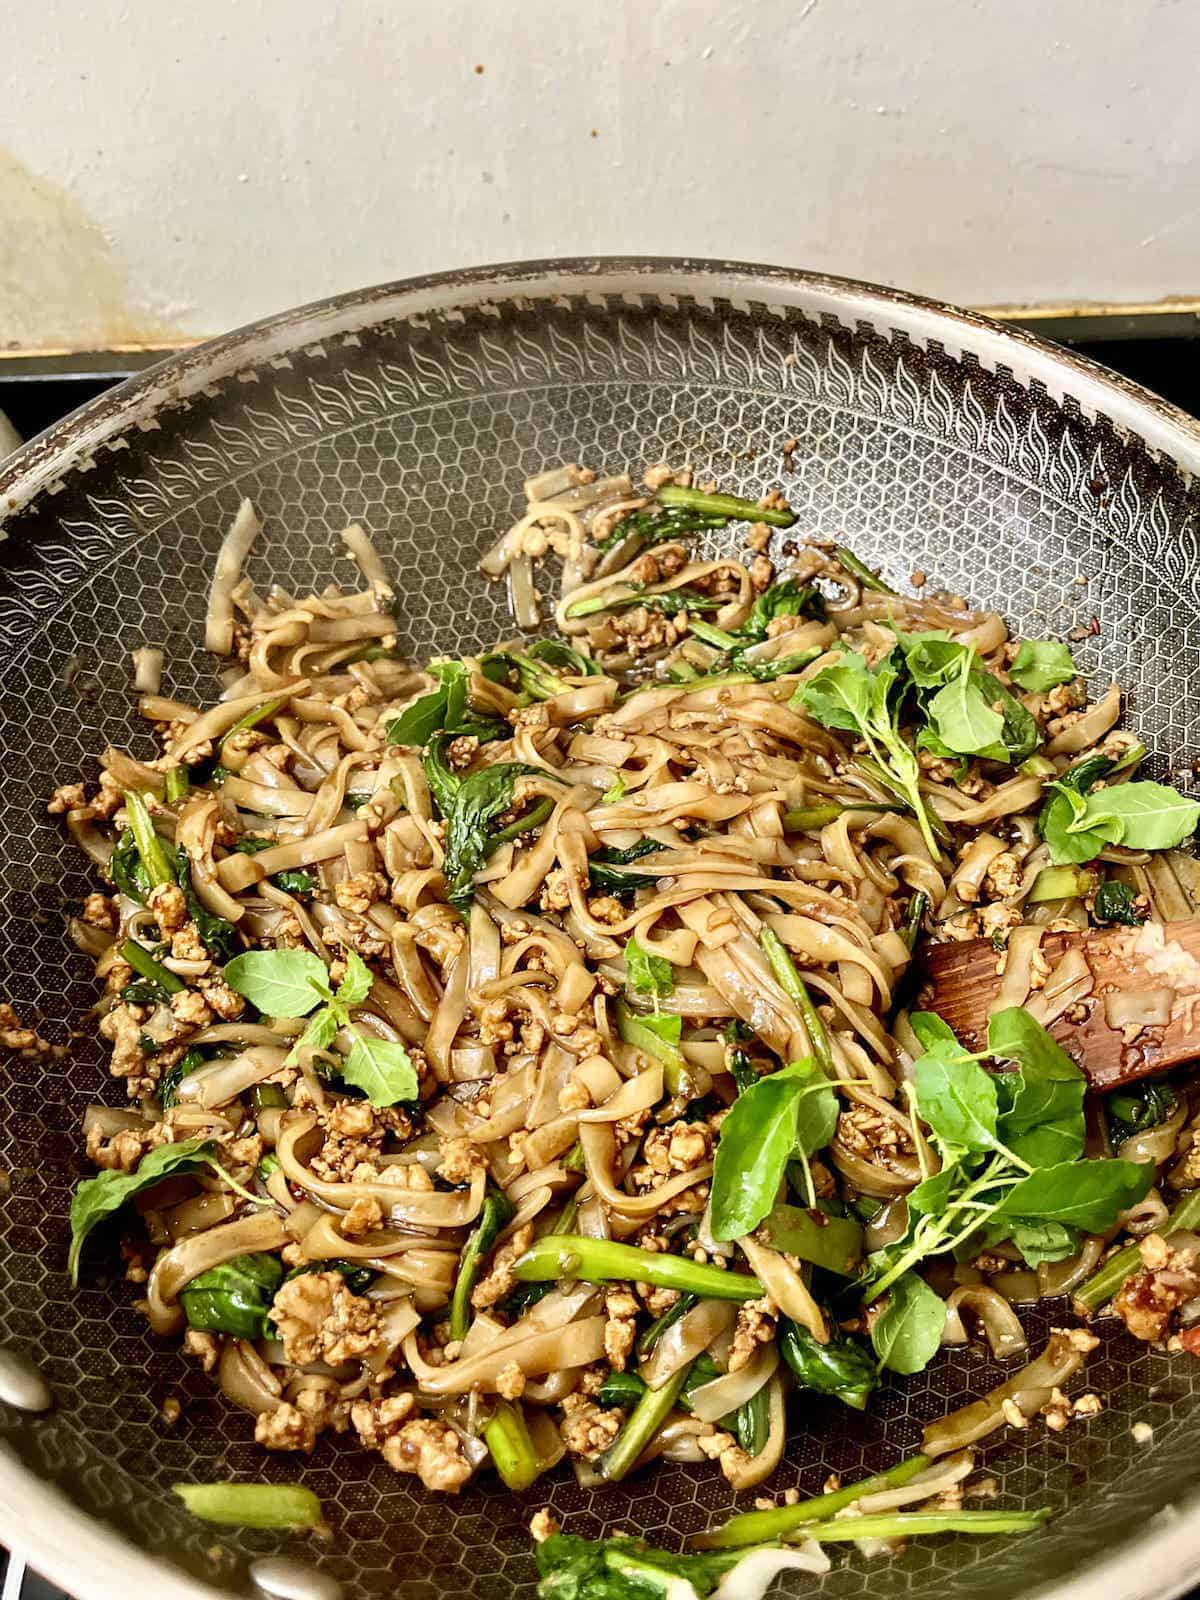 Adding holy basil leaves to a wok full of dark noodles.